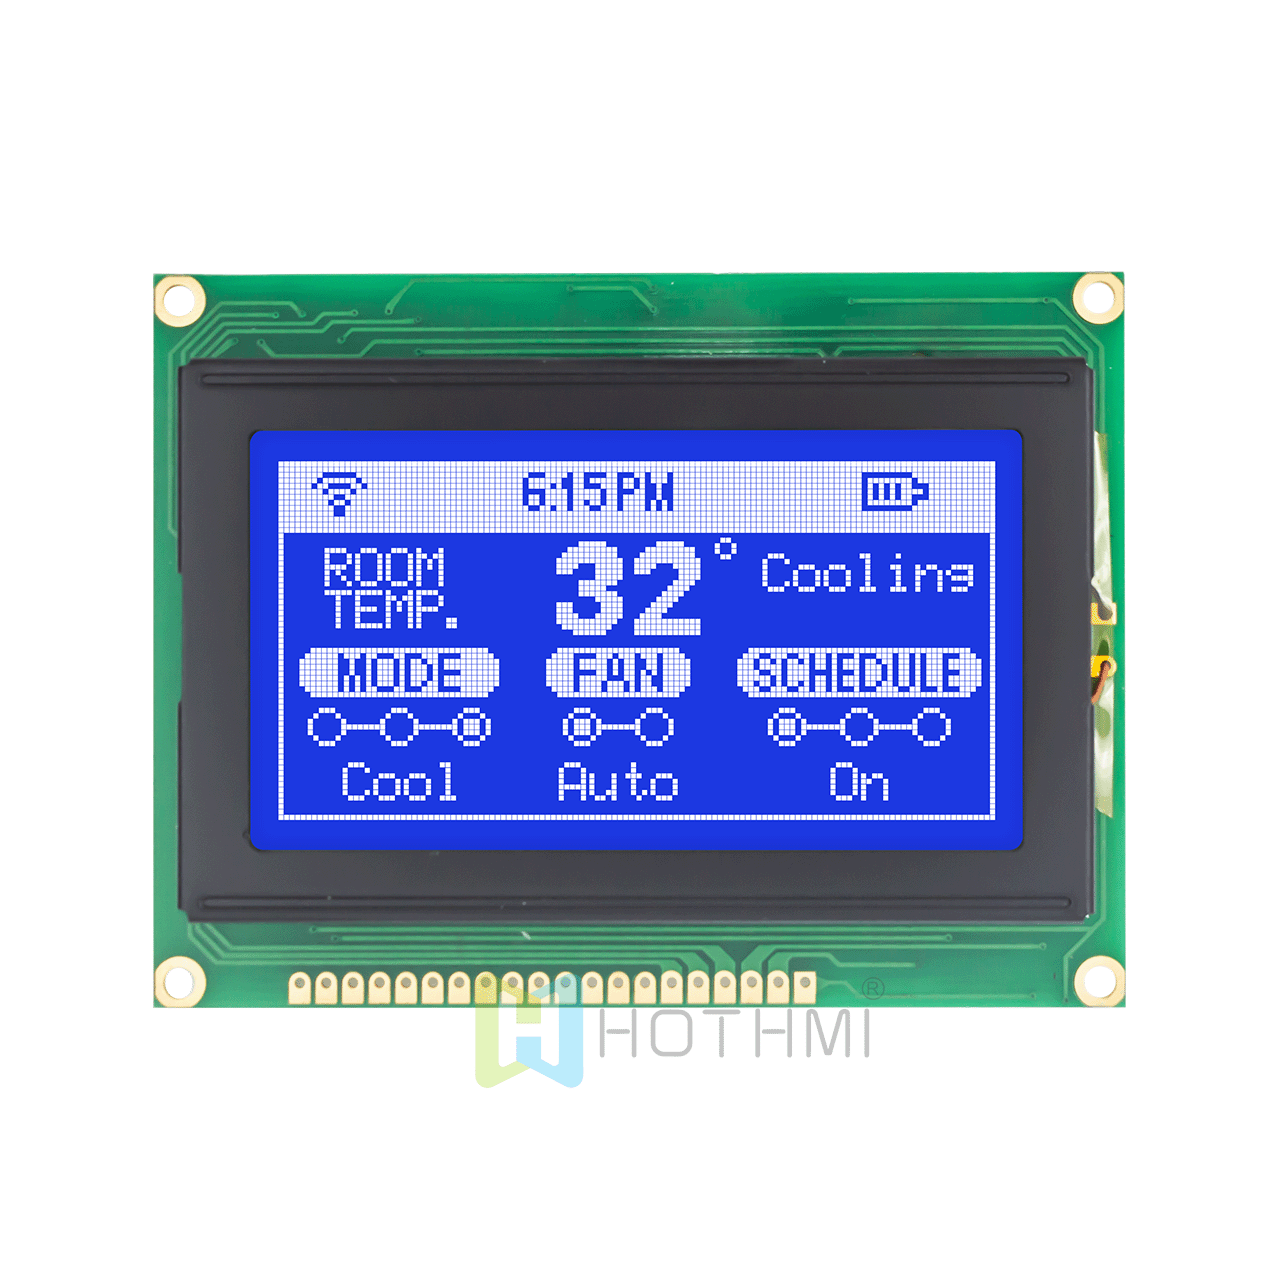 3.2"128X64 graphic LCD module/STN negative display/blue background white pixel display/white backlight/KS0107+KS0108 or compatible/fully transparent polarizer